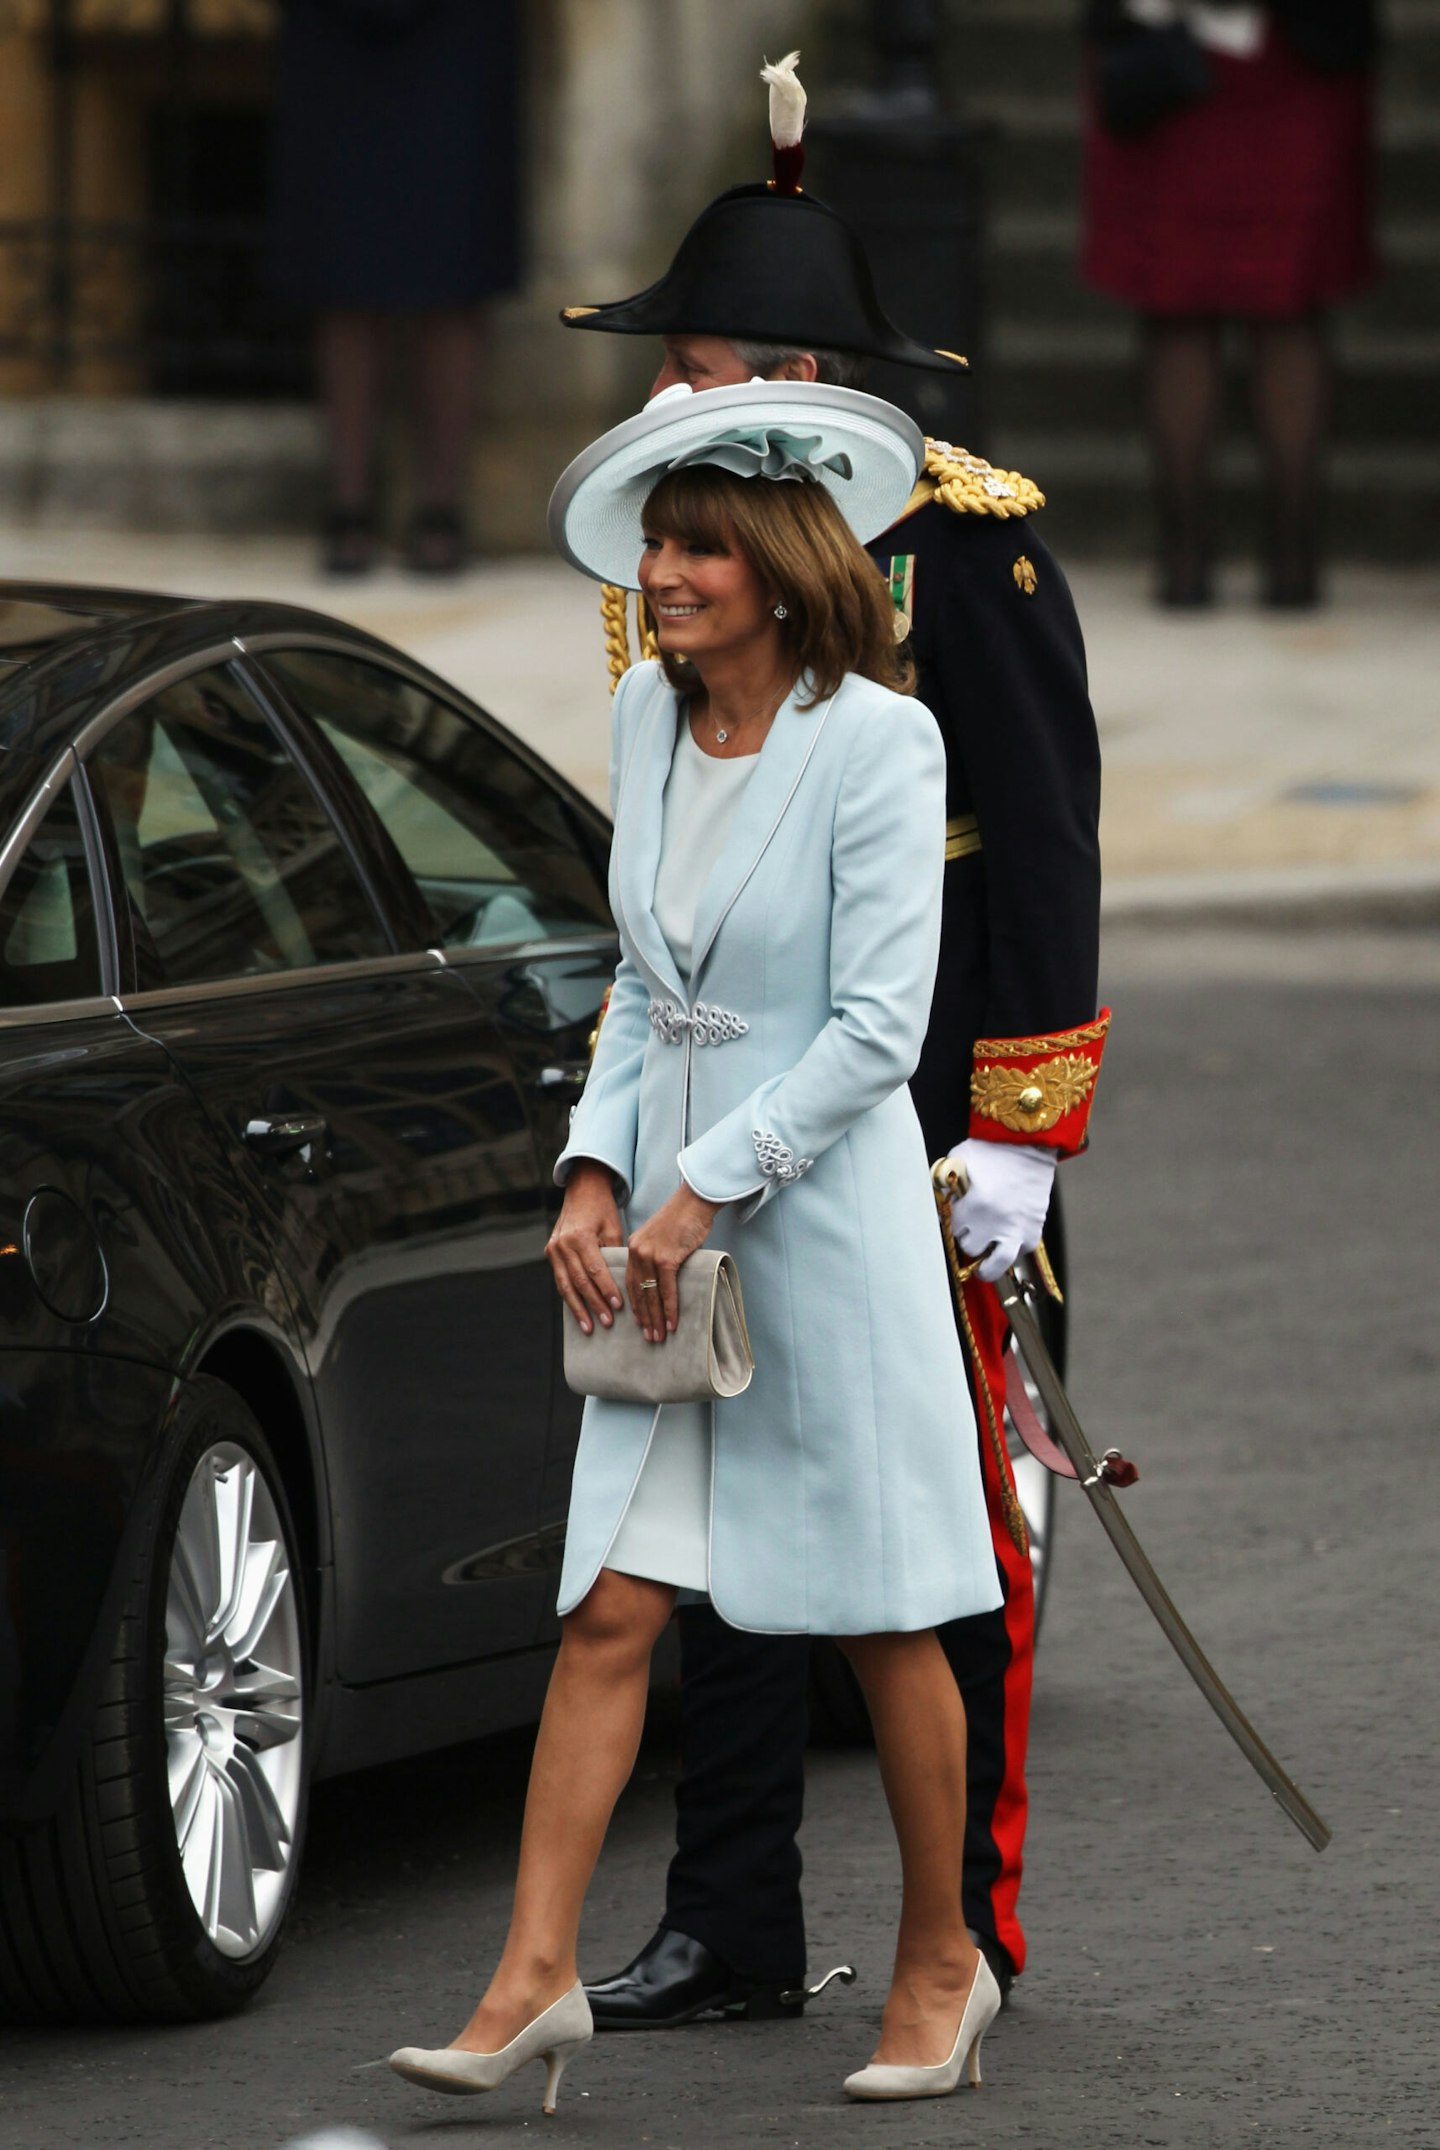 Carole Middleton attends the Royal Wedding of Prince William and Catherine